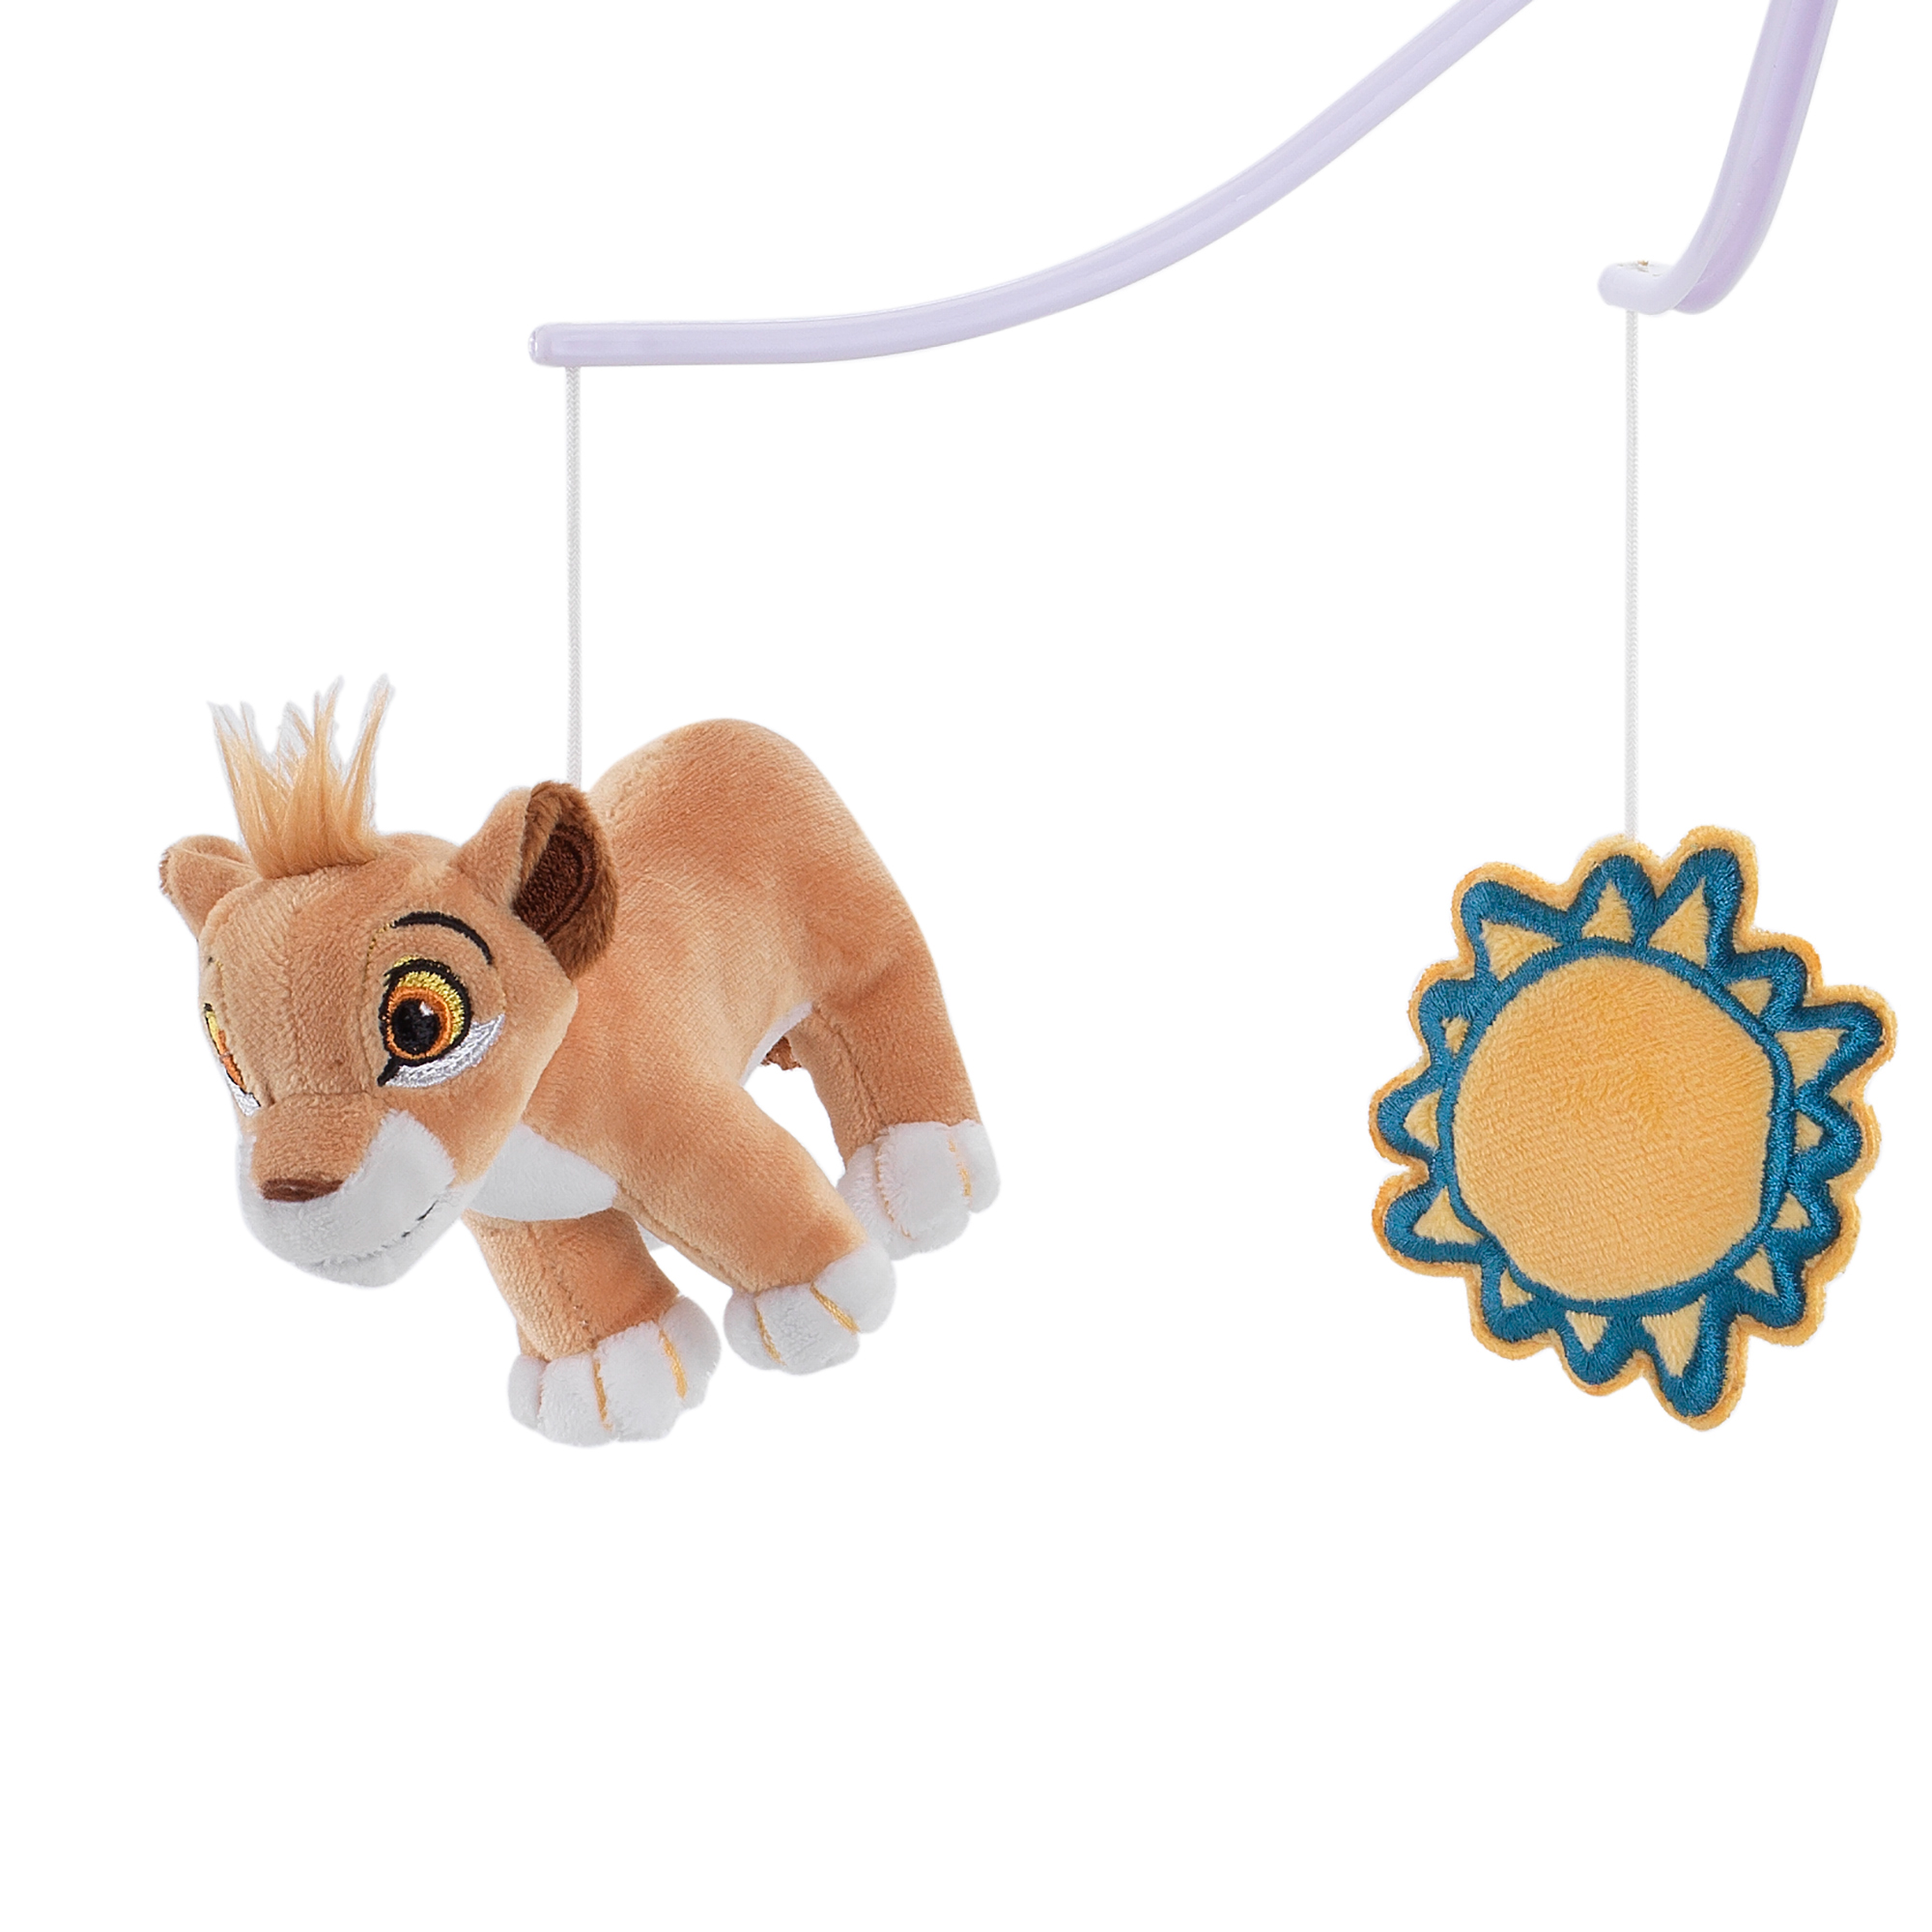 Disney Baby Lion King Adventure Musical Baby Crib Mobile by Lambs & Ivy - Blue - image 2 of 4